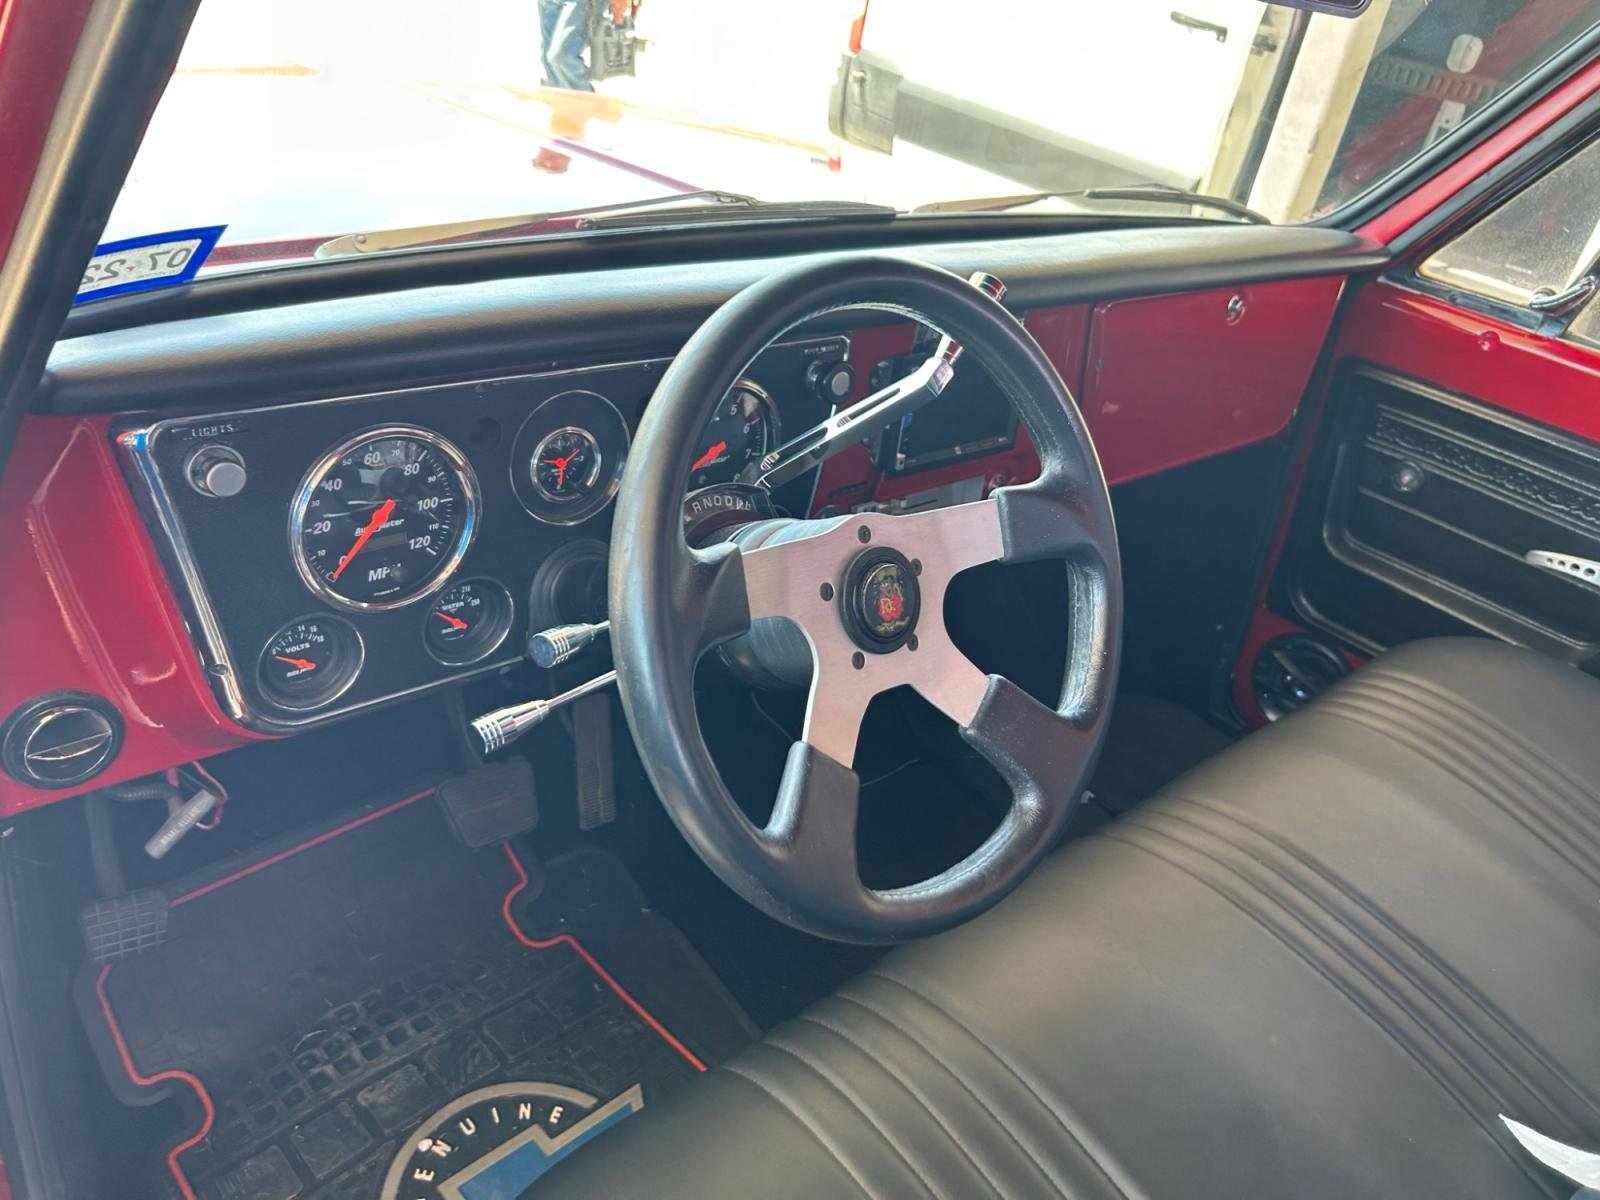 1972 Red Chevrolet C10 (CCE142A1201) , located at 1687 Business 35 S, New Braunfels, TX, 78130, (830) 625-7159, 29.655487, -98.051491 - Photo #8